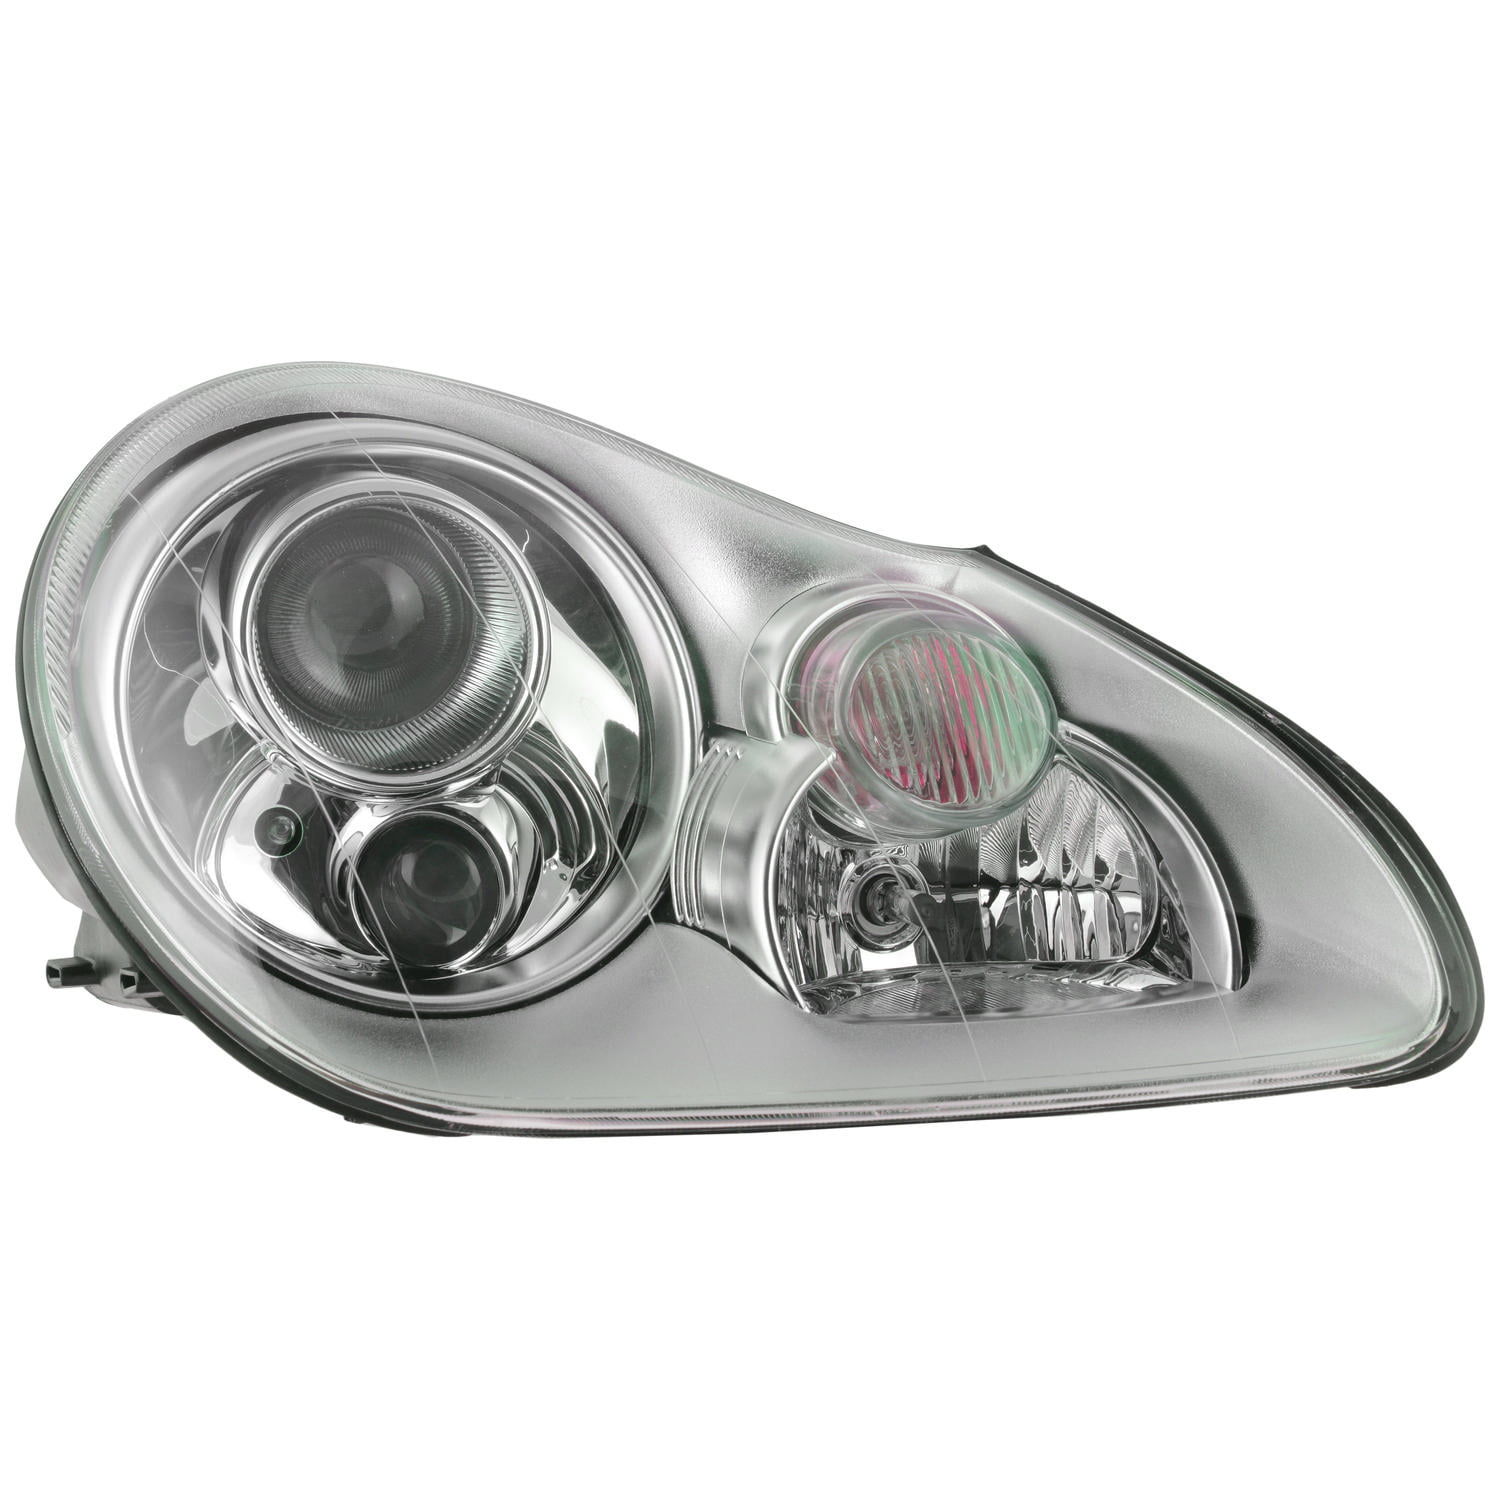 Sold in Pairs Anzo USA 121080 Mercedes-Benz Projector Chrome Headlight Assembly 